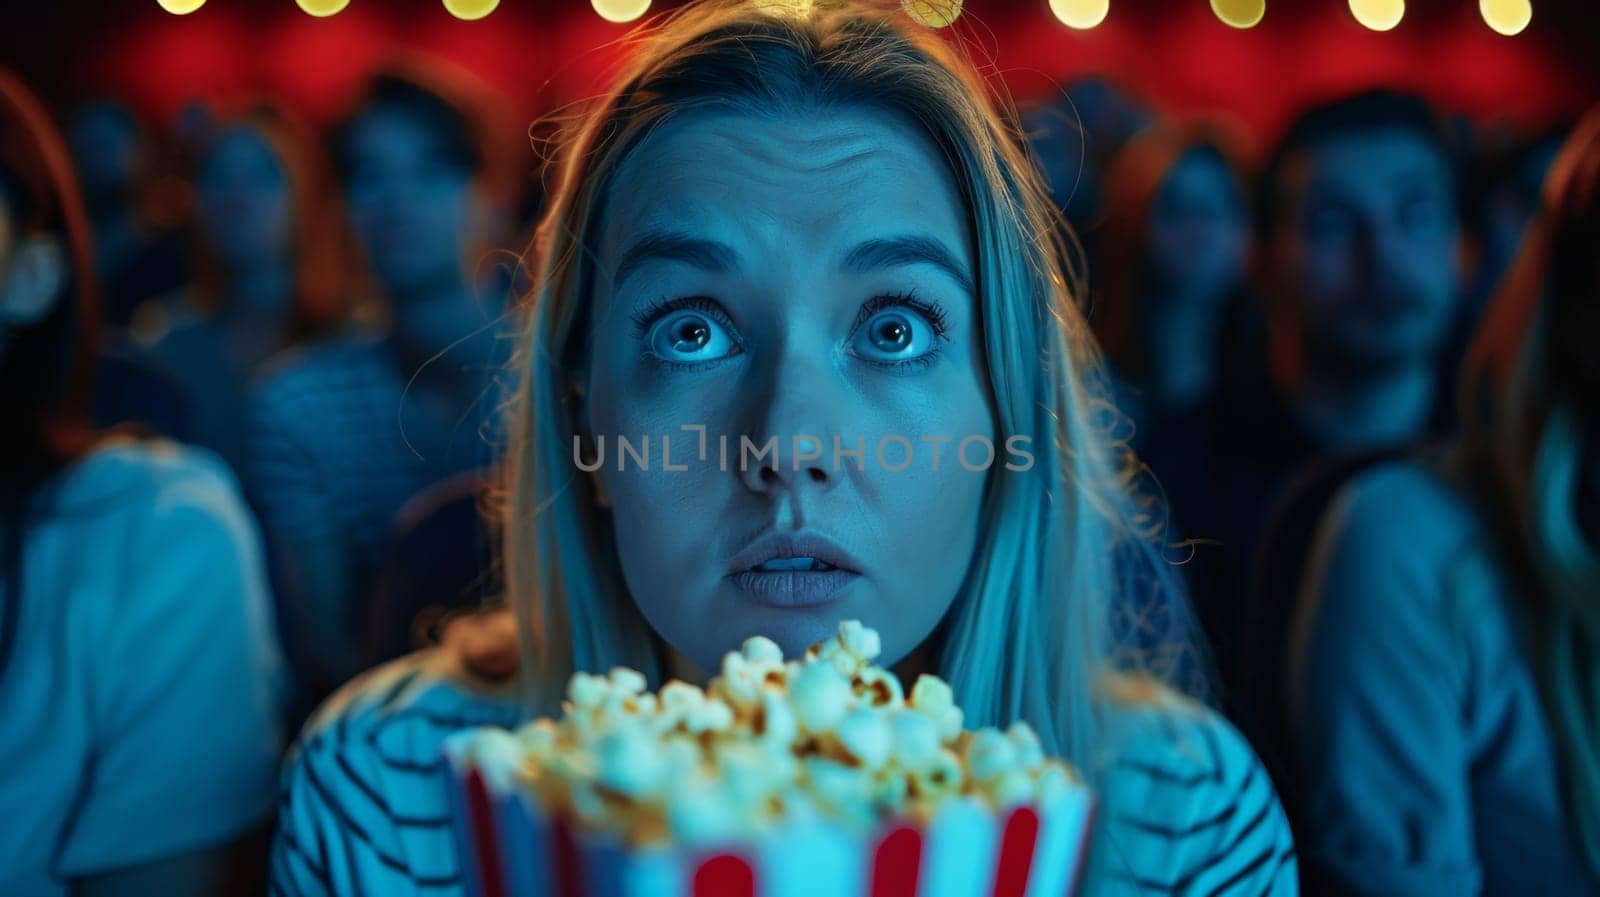 Headshot of a frightened woman holding a popcorn in a cinema watching a movie.